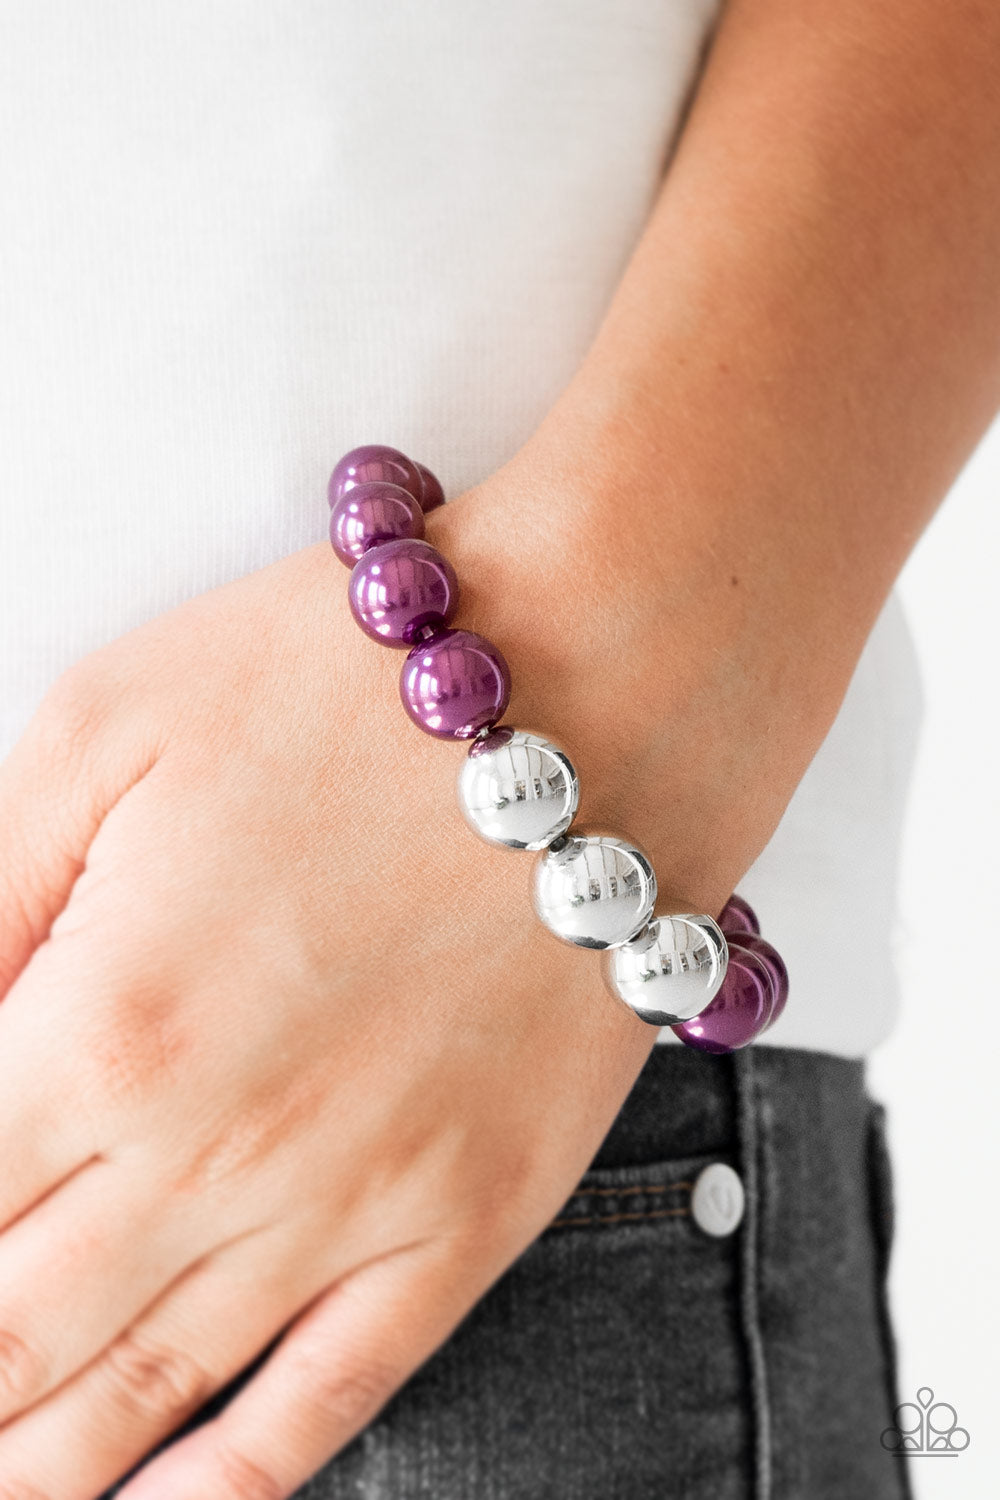 Paparazzi Accessories All Dressed UPTOWN - Purple Bracelets gradually increased in size near the center, oversized pearly purple and shiny silver beads are threaded along a stretchy band around the wrist for a glamorous finish.